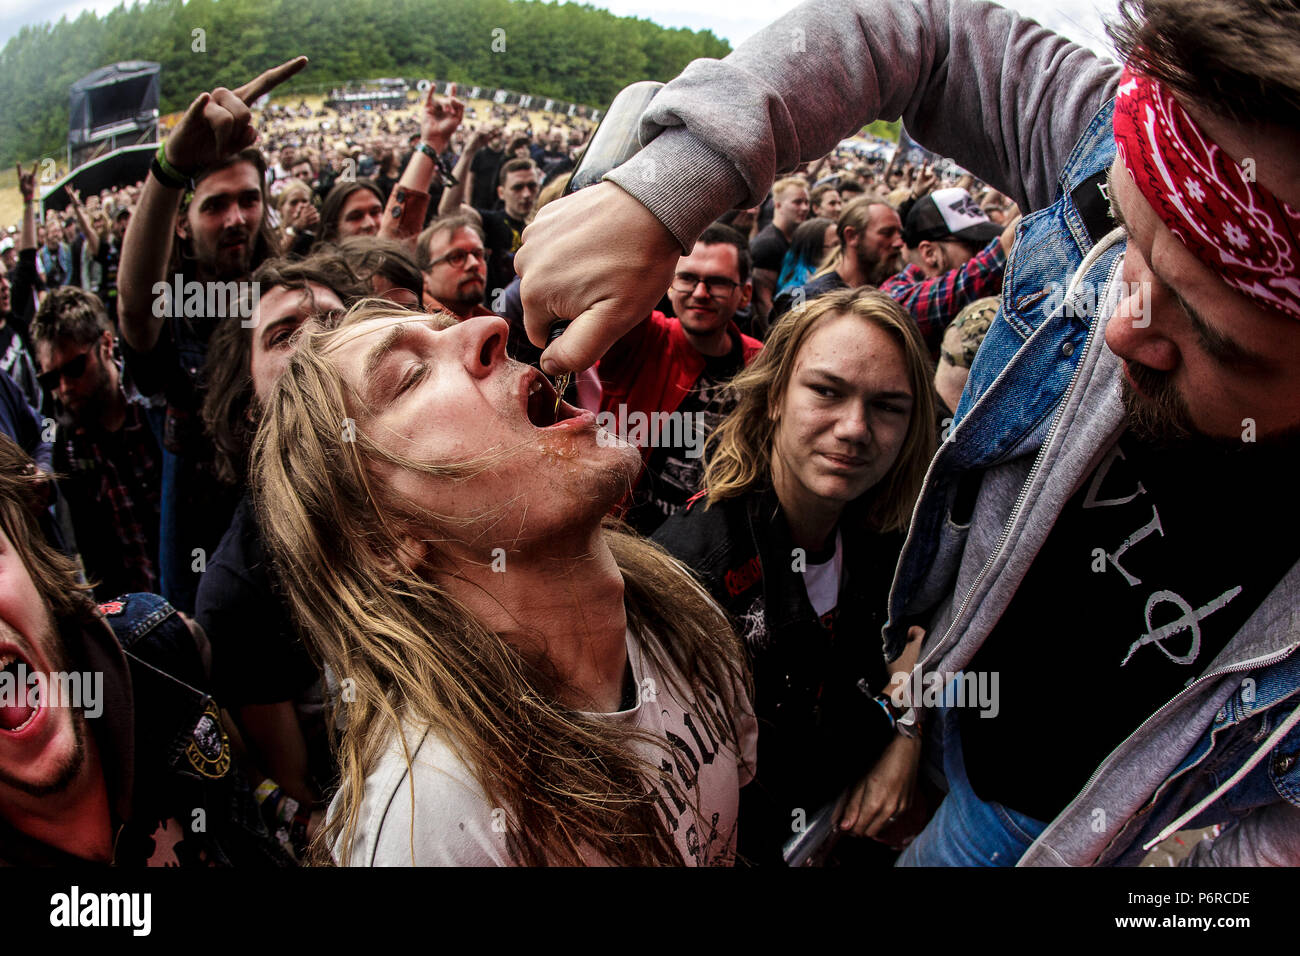 Denmark, Copenhagen - June 23, 2018. Enthusiastic heavy metal fans have a  great time during the danish hard rock and music festival Copenhell 2018 in  Copenhagen. Time for a shot. (Photo credit: